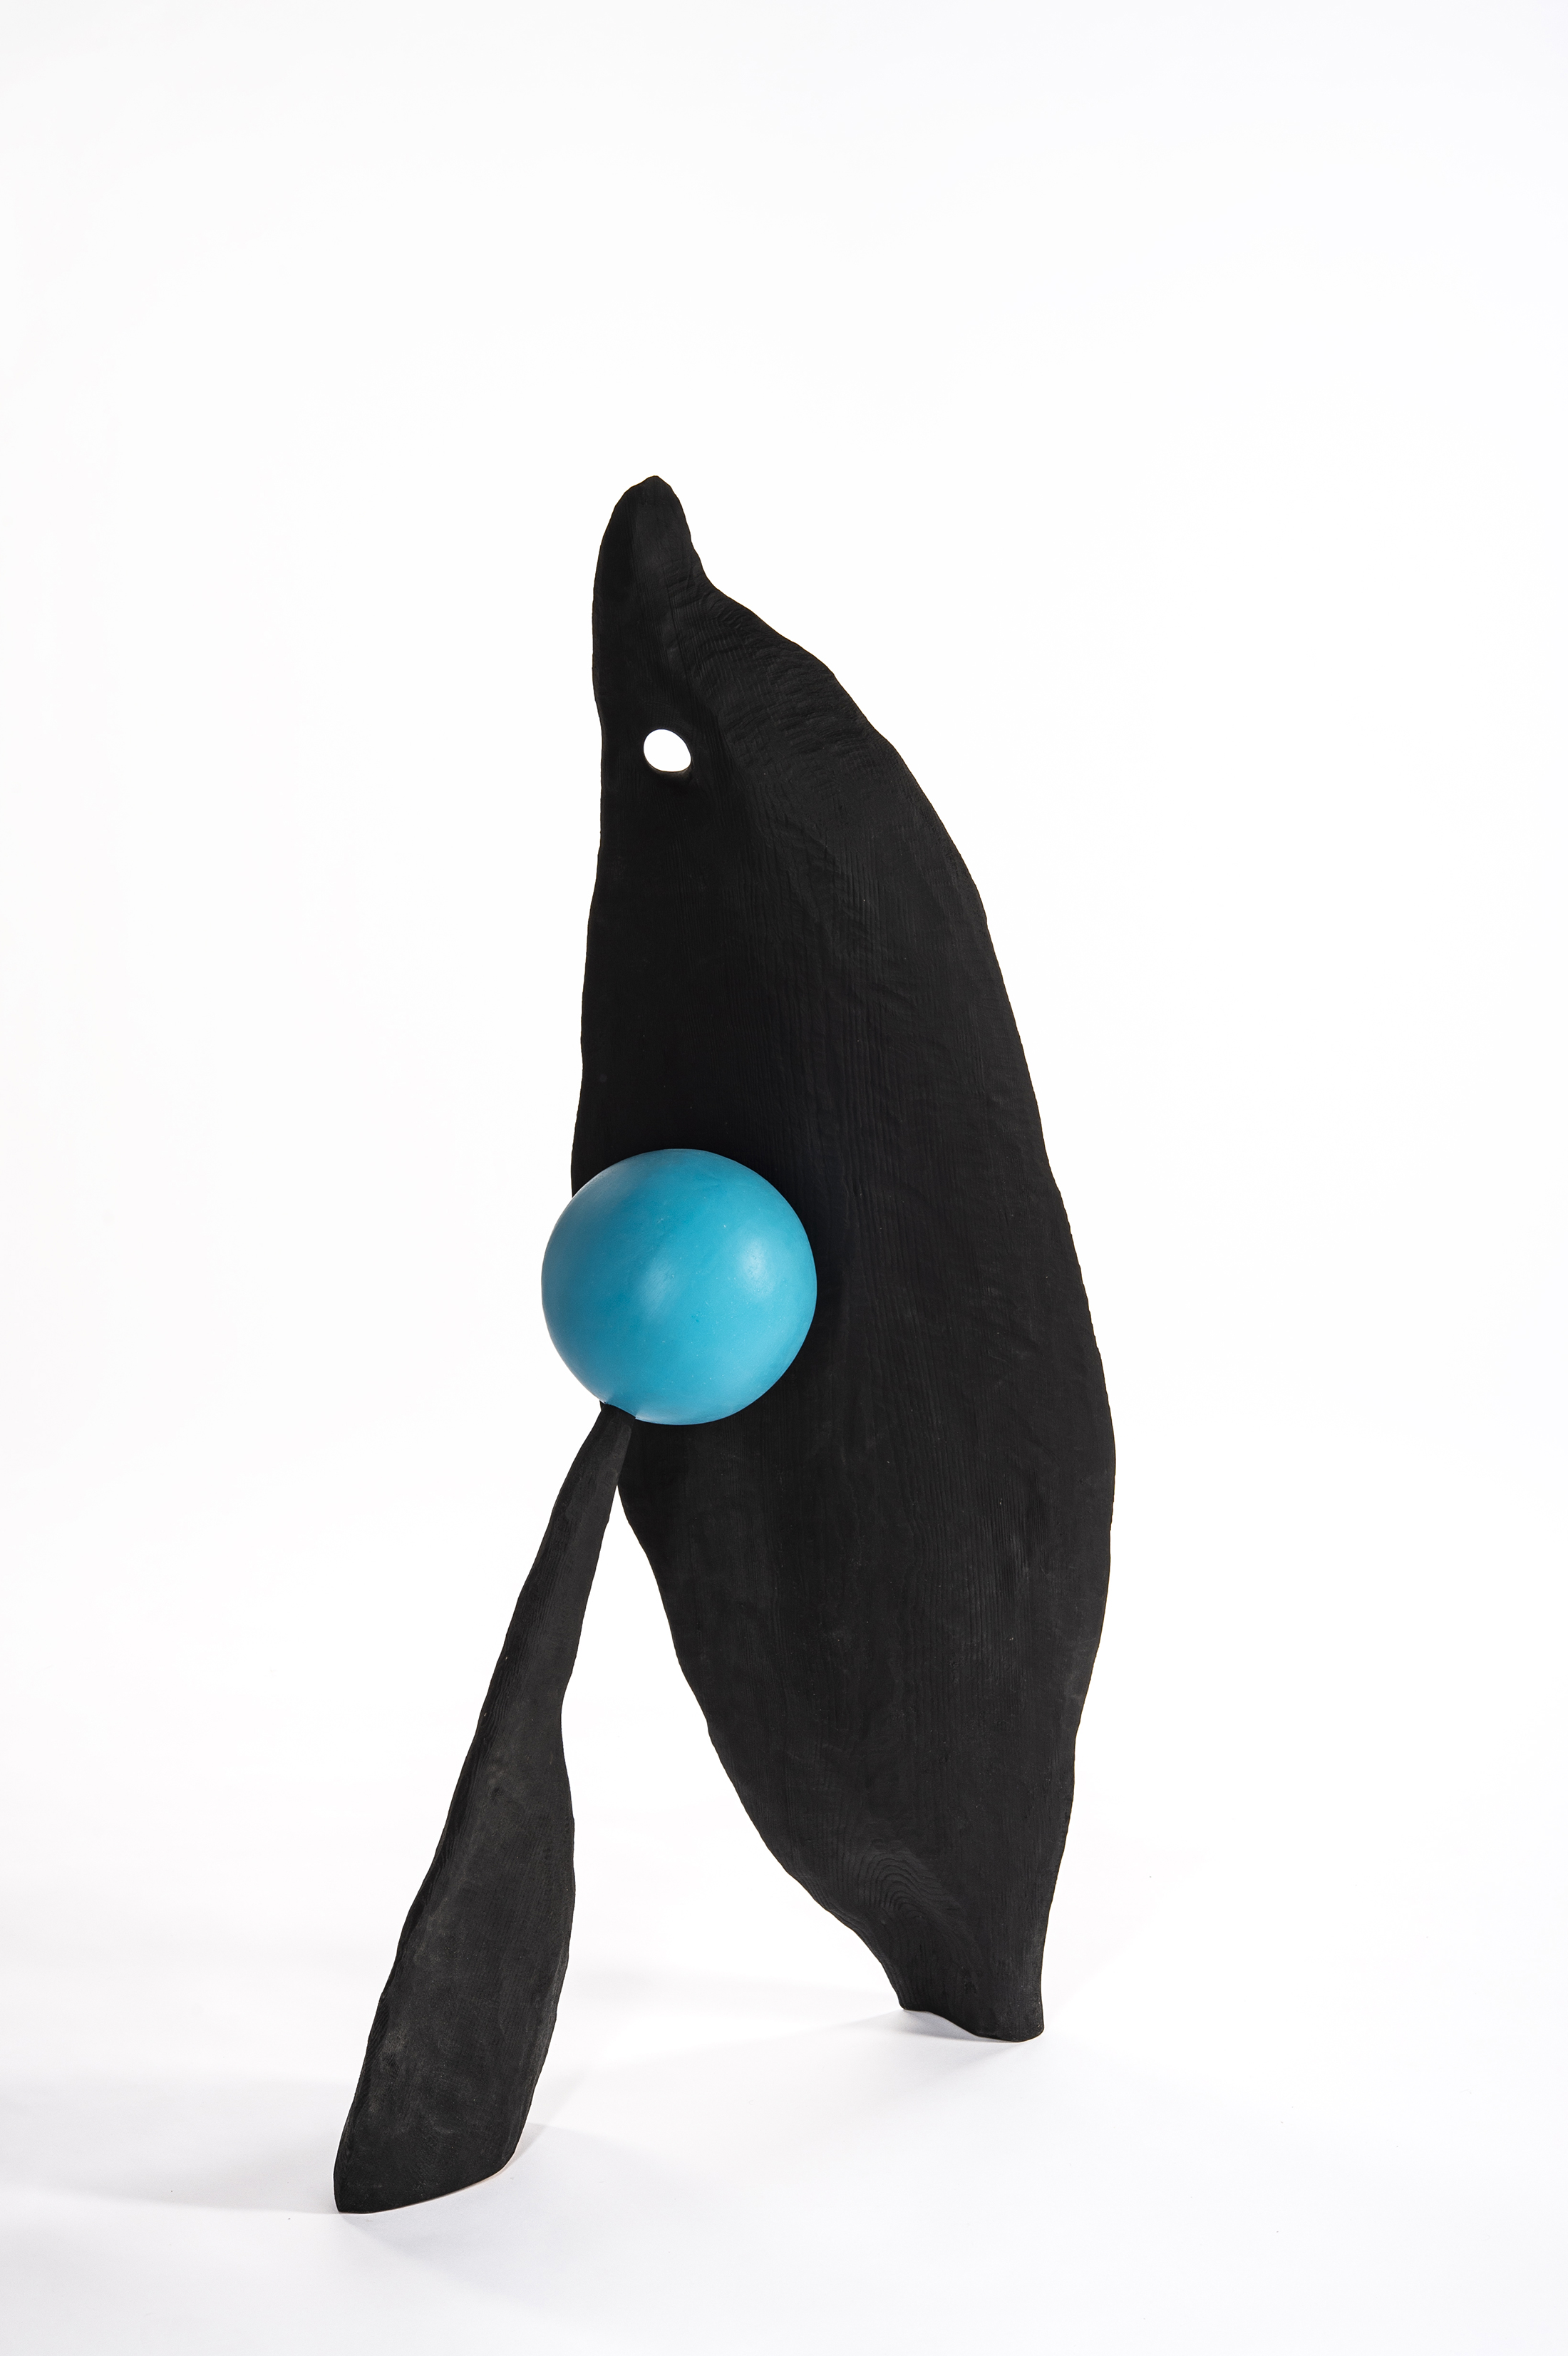 A black sculpture with two large wood pieces sandwiching a blue ball.